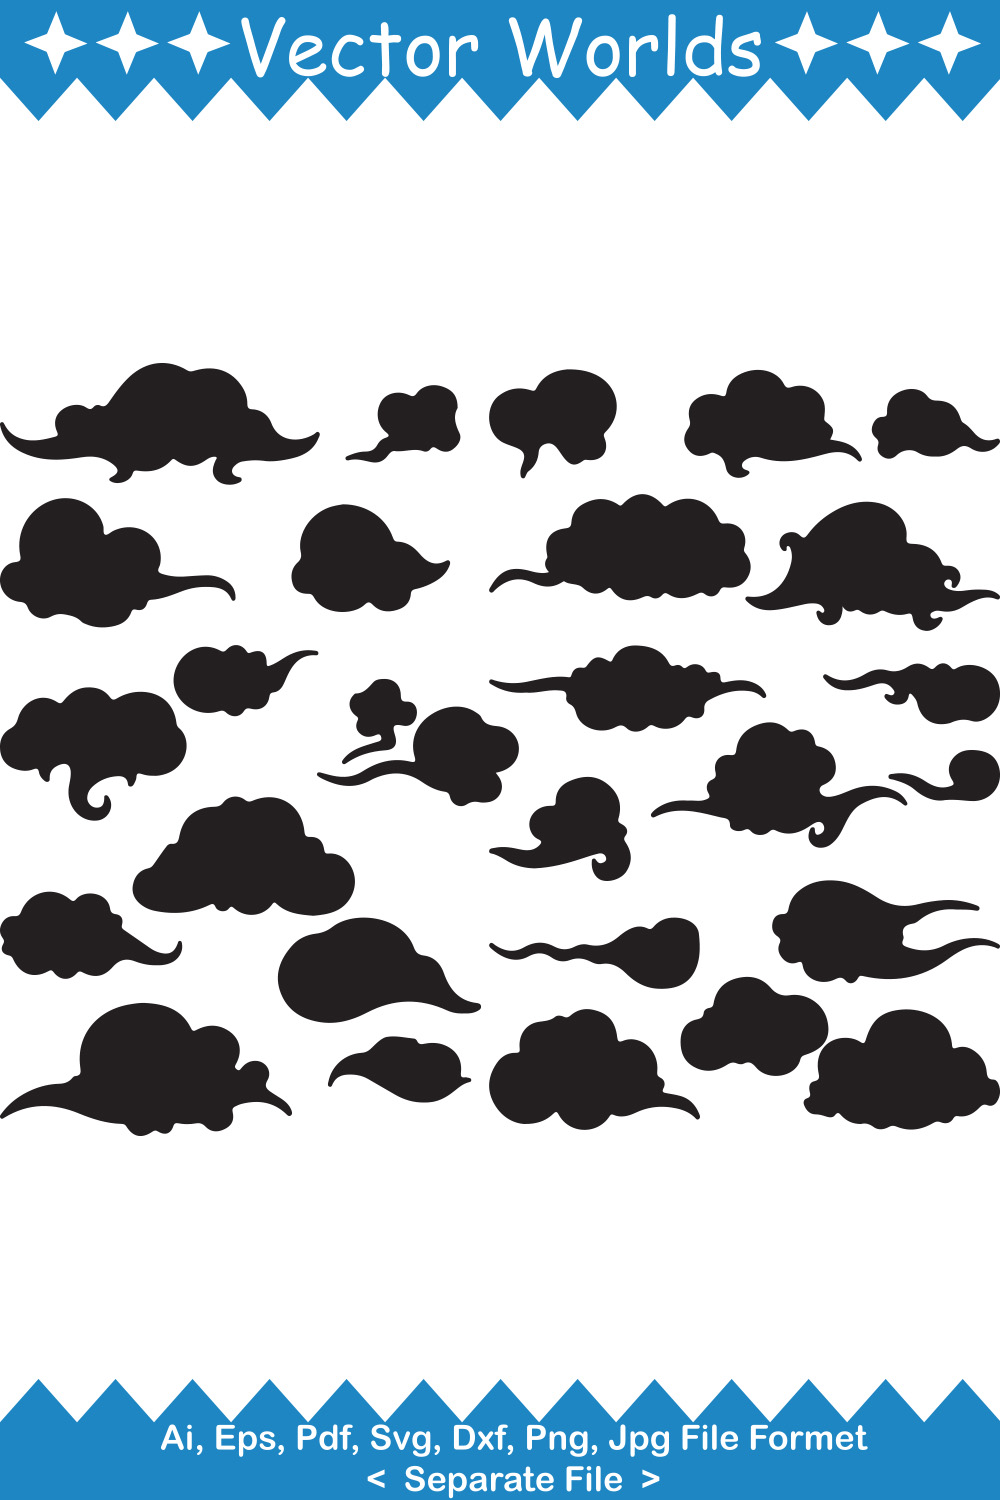 A selection of unique vector images of the silhouette of Chinese clouds.